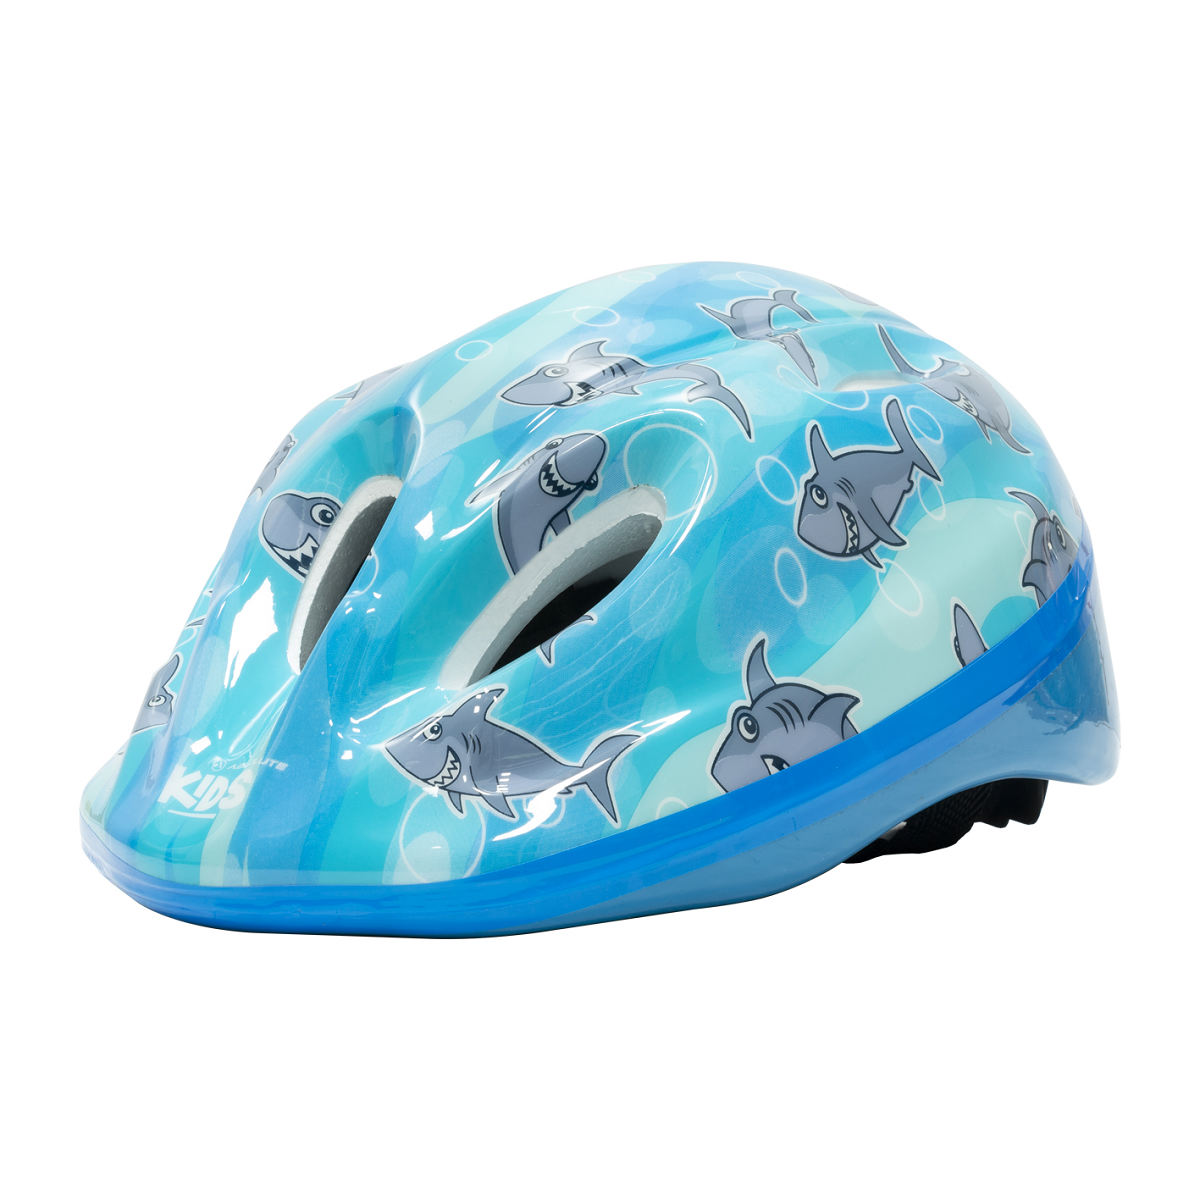 Capacete-Infantil-ABS-Azul-Kids-Shake-Tubarao-Absolute---10674--1-